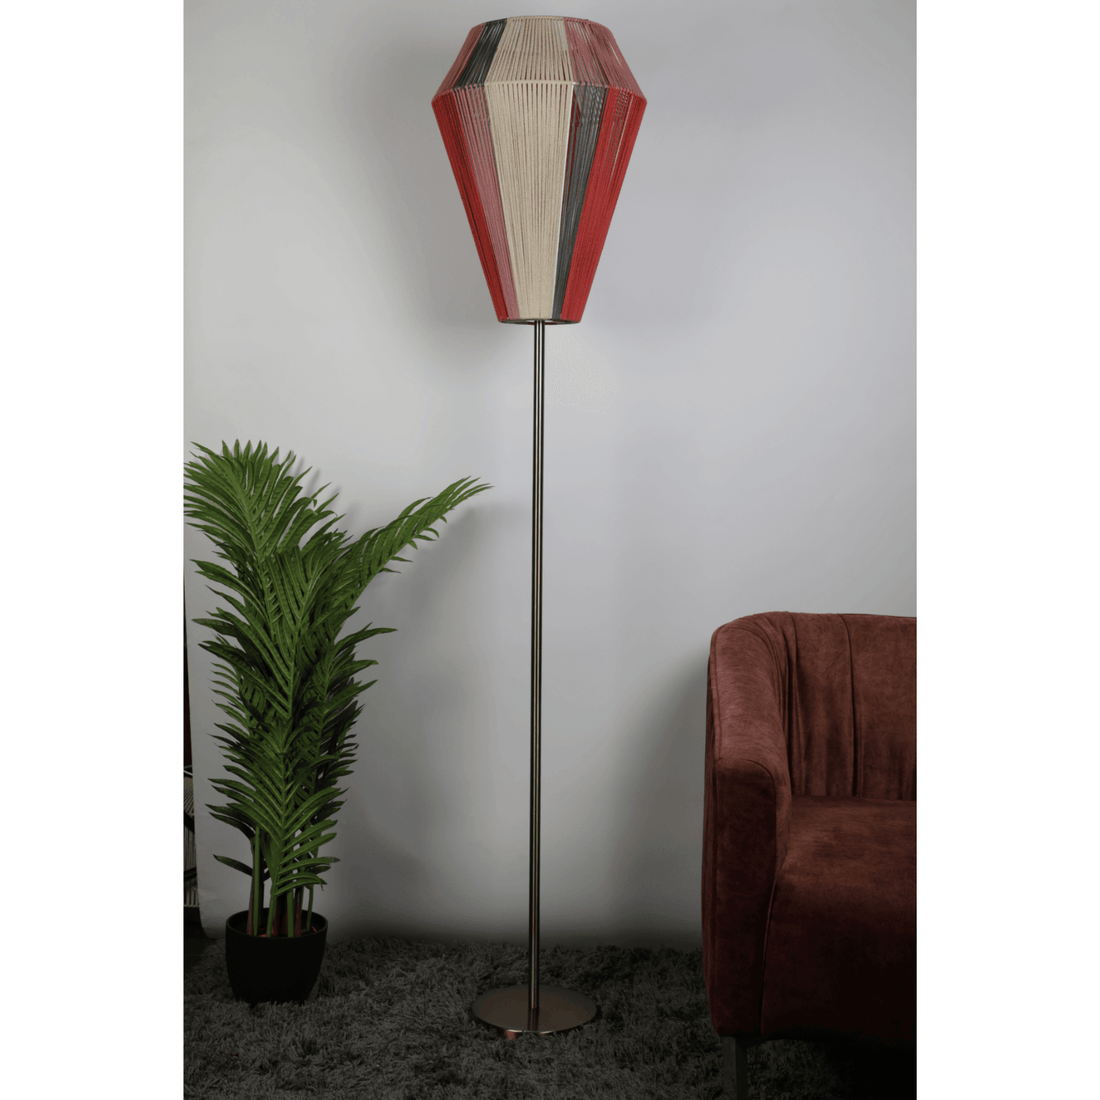 Saneka Handcrafted Floor Lamp by The Light Library